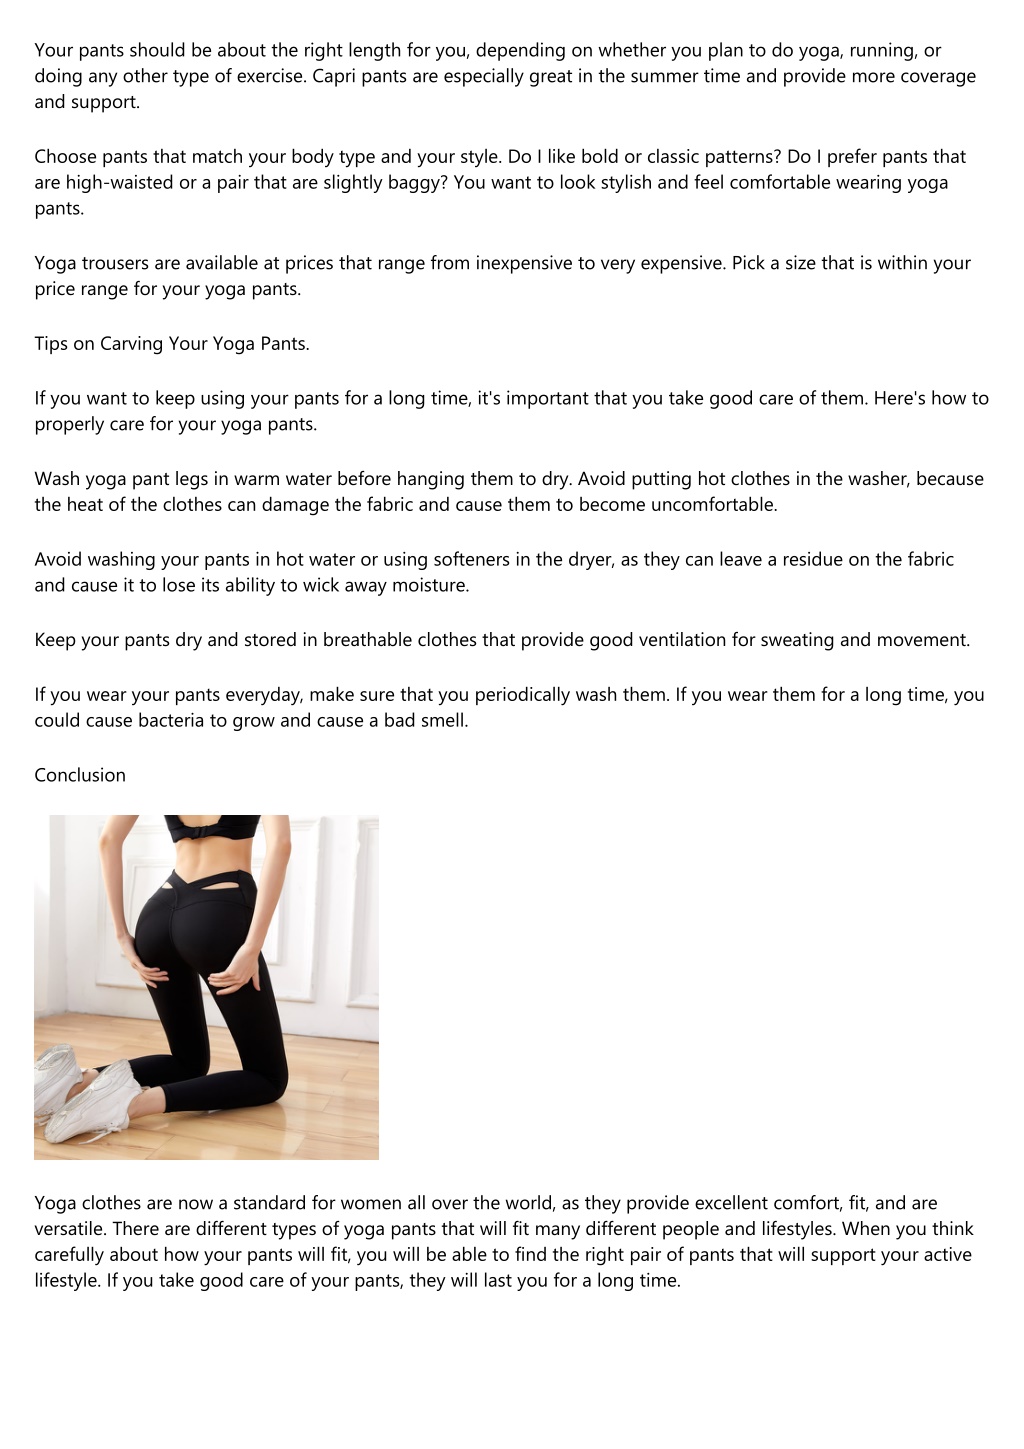 PPT - 10 Quick Tips About north face yoga pants PowerPoint Presentation -  ID:12033164